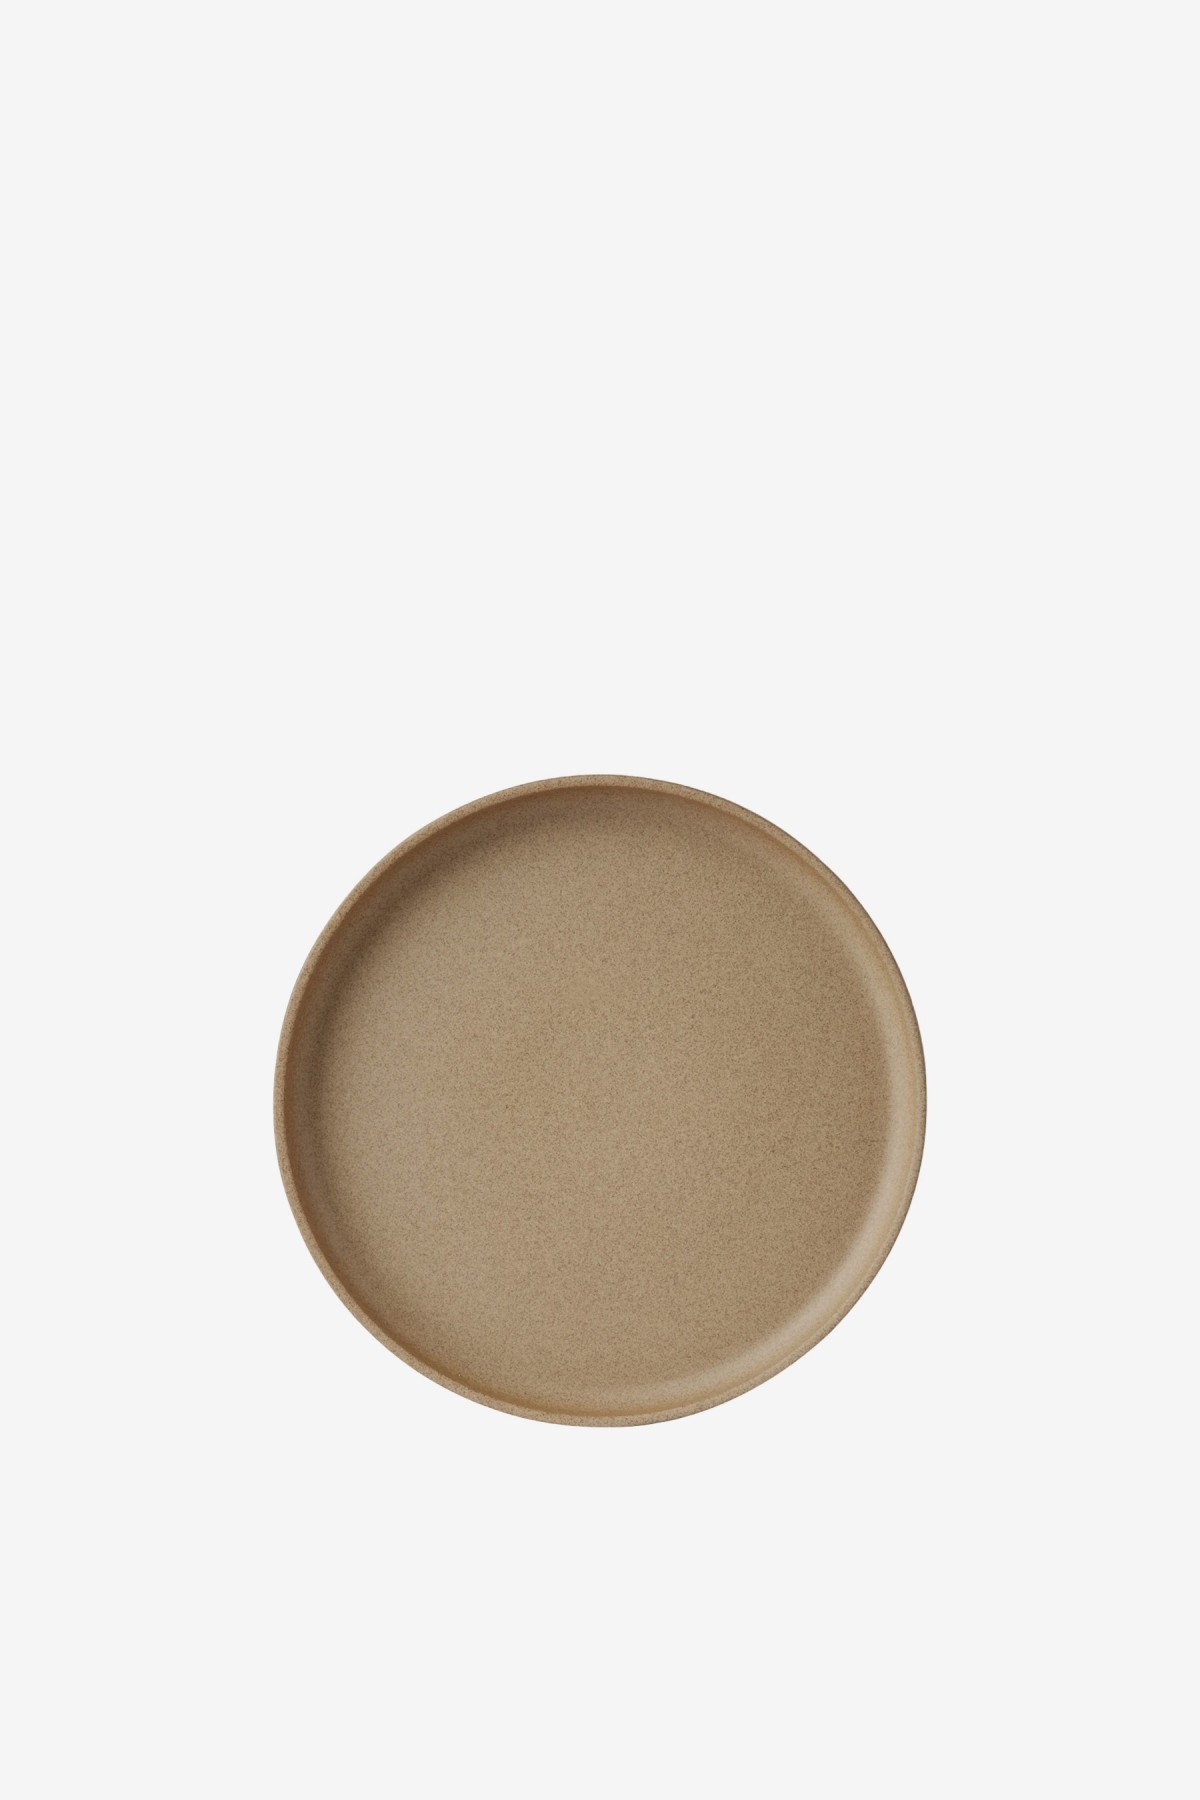 Hasami Porcelain Plate 145 in Sand